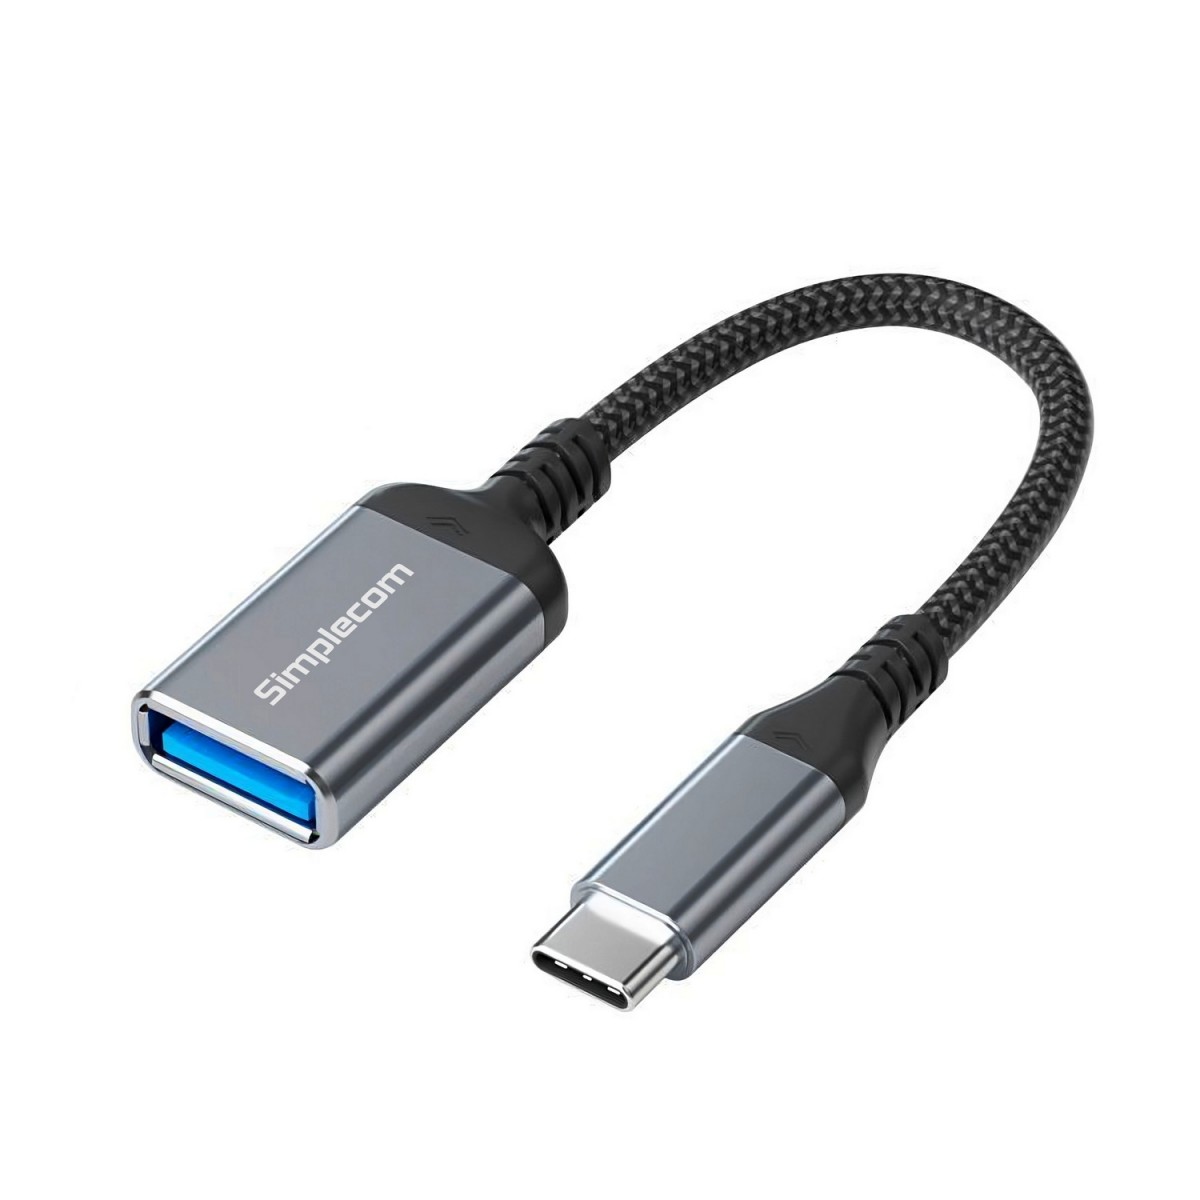  USB-C Type-C Male to USB-A Female USB 3.0 OTG Adapter Cable  